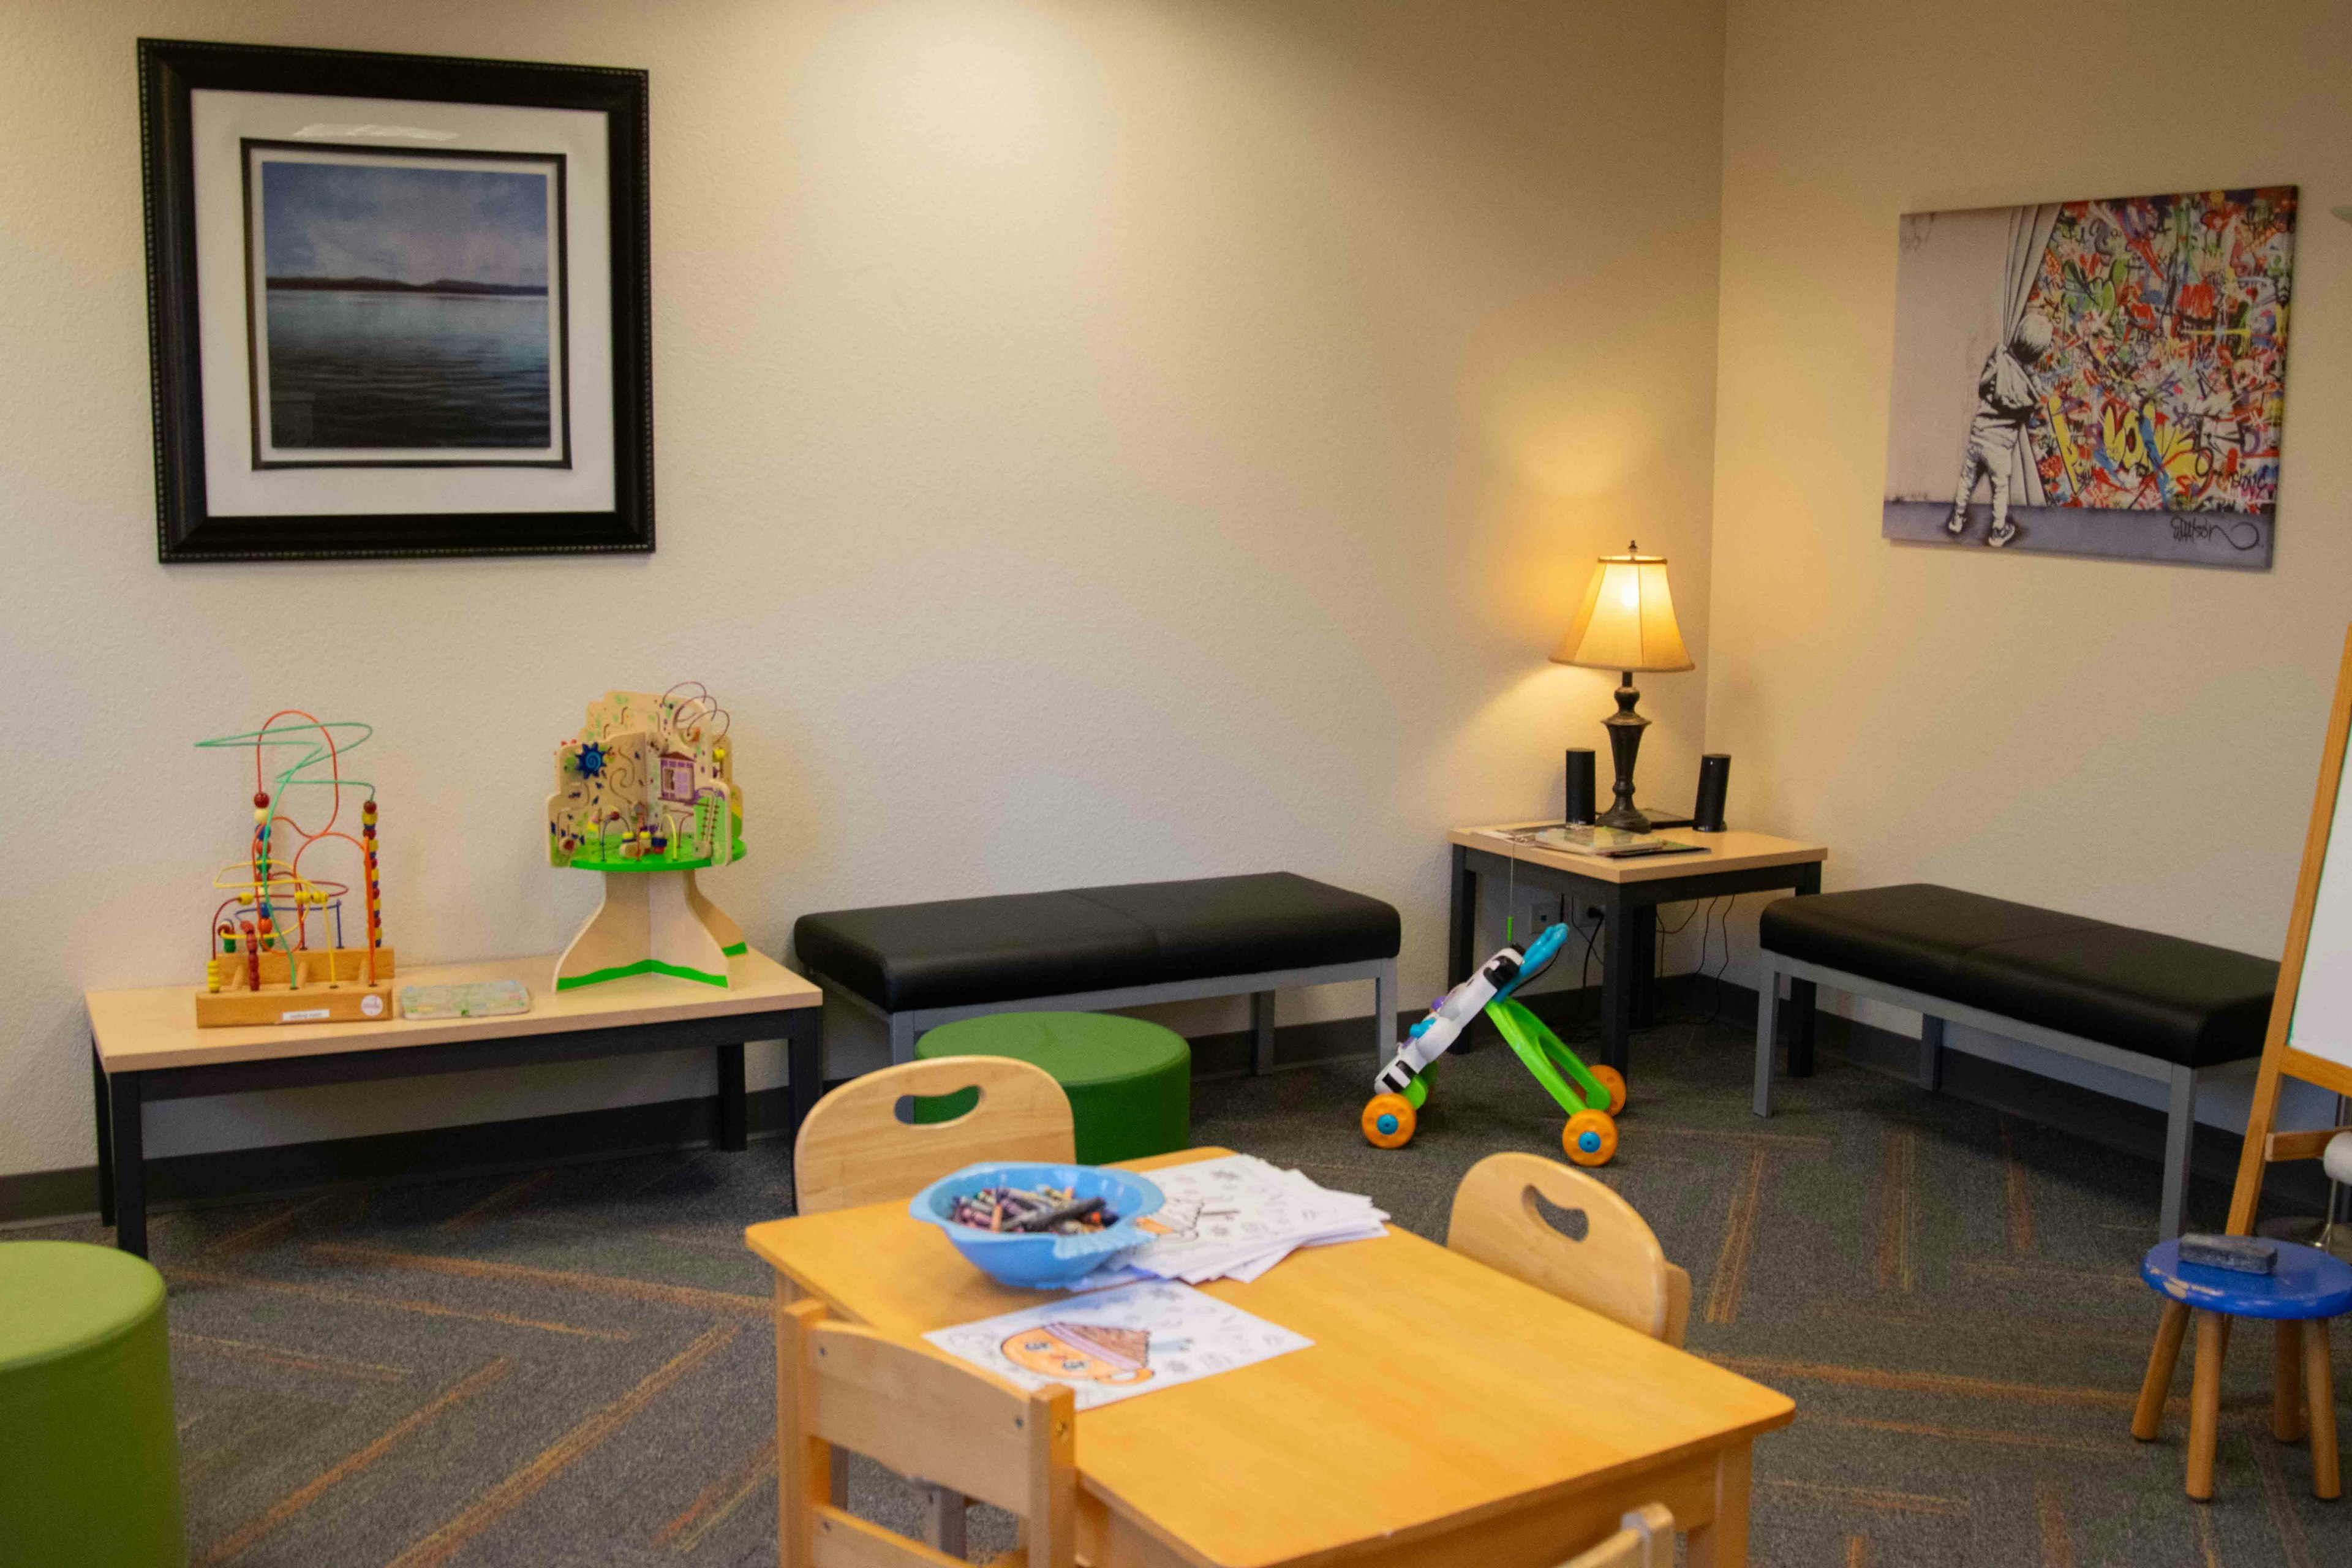 Inside lobby of Norton. Playroom with kids' games and benches along the wall.